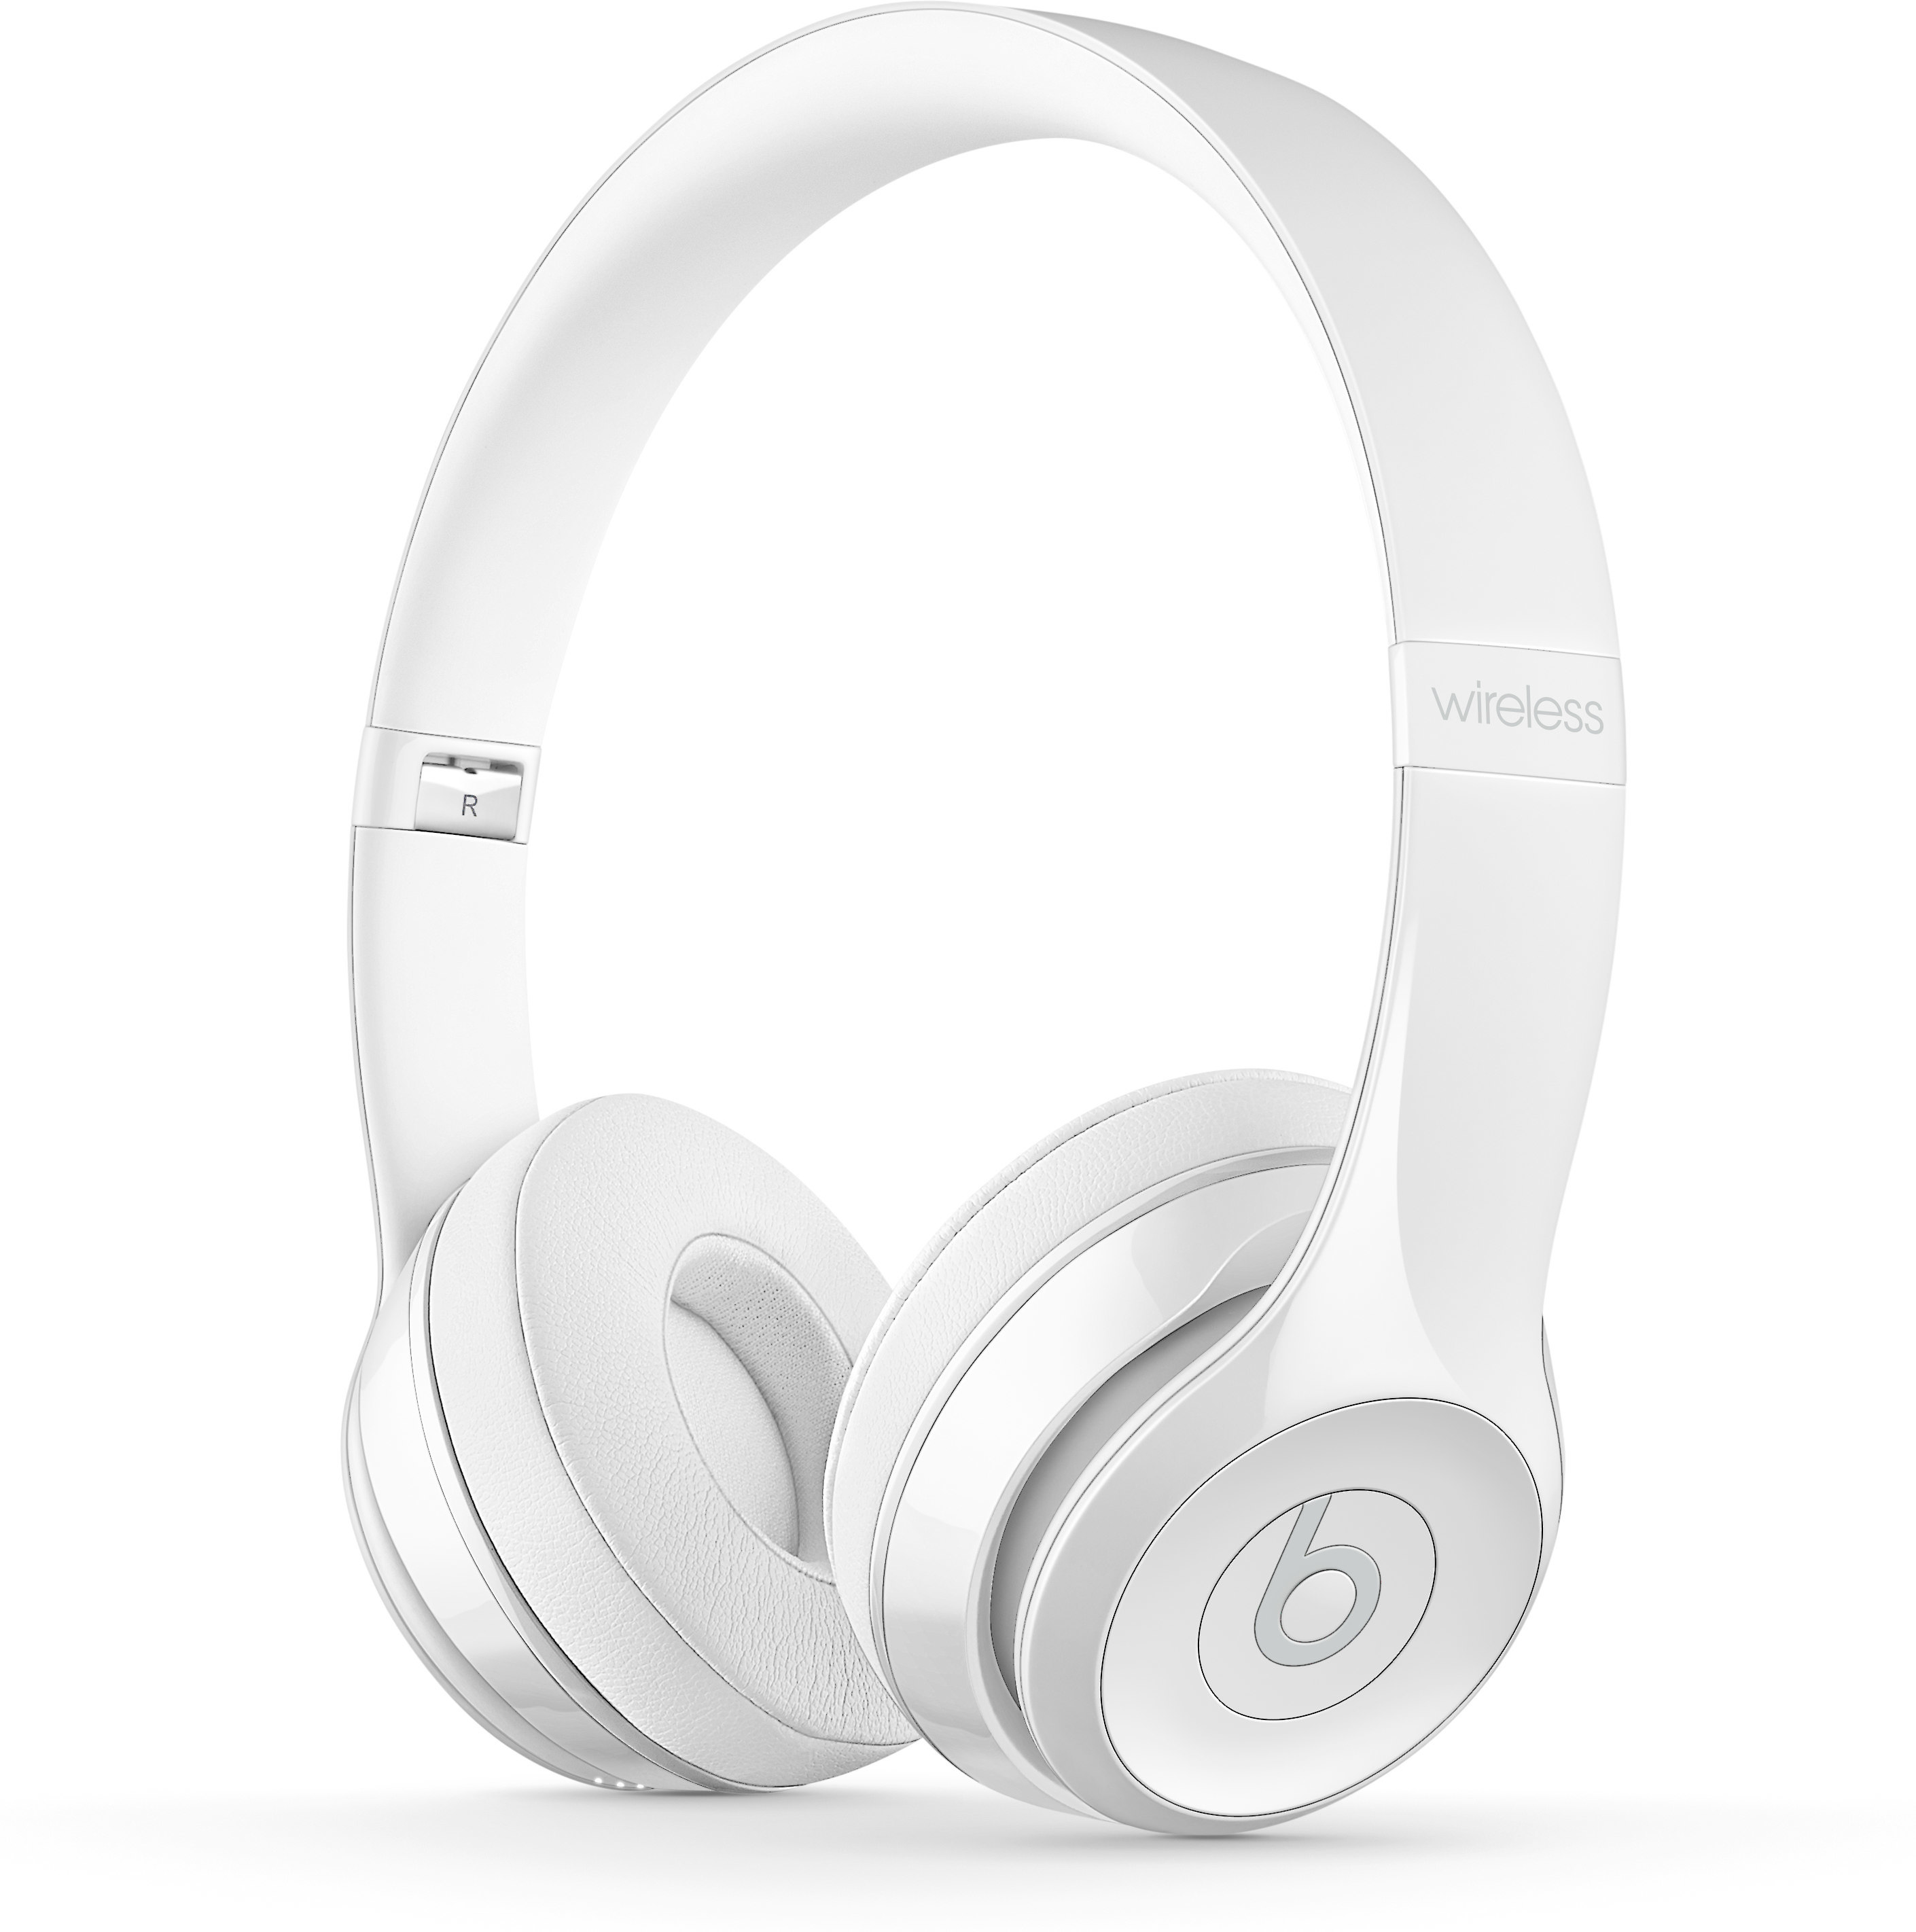 Customer Reviews: Beats by Dr. Dre® Solo3 wireless (Gloss White